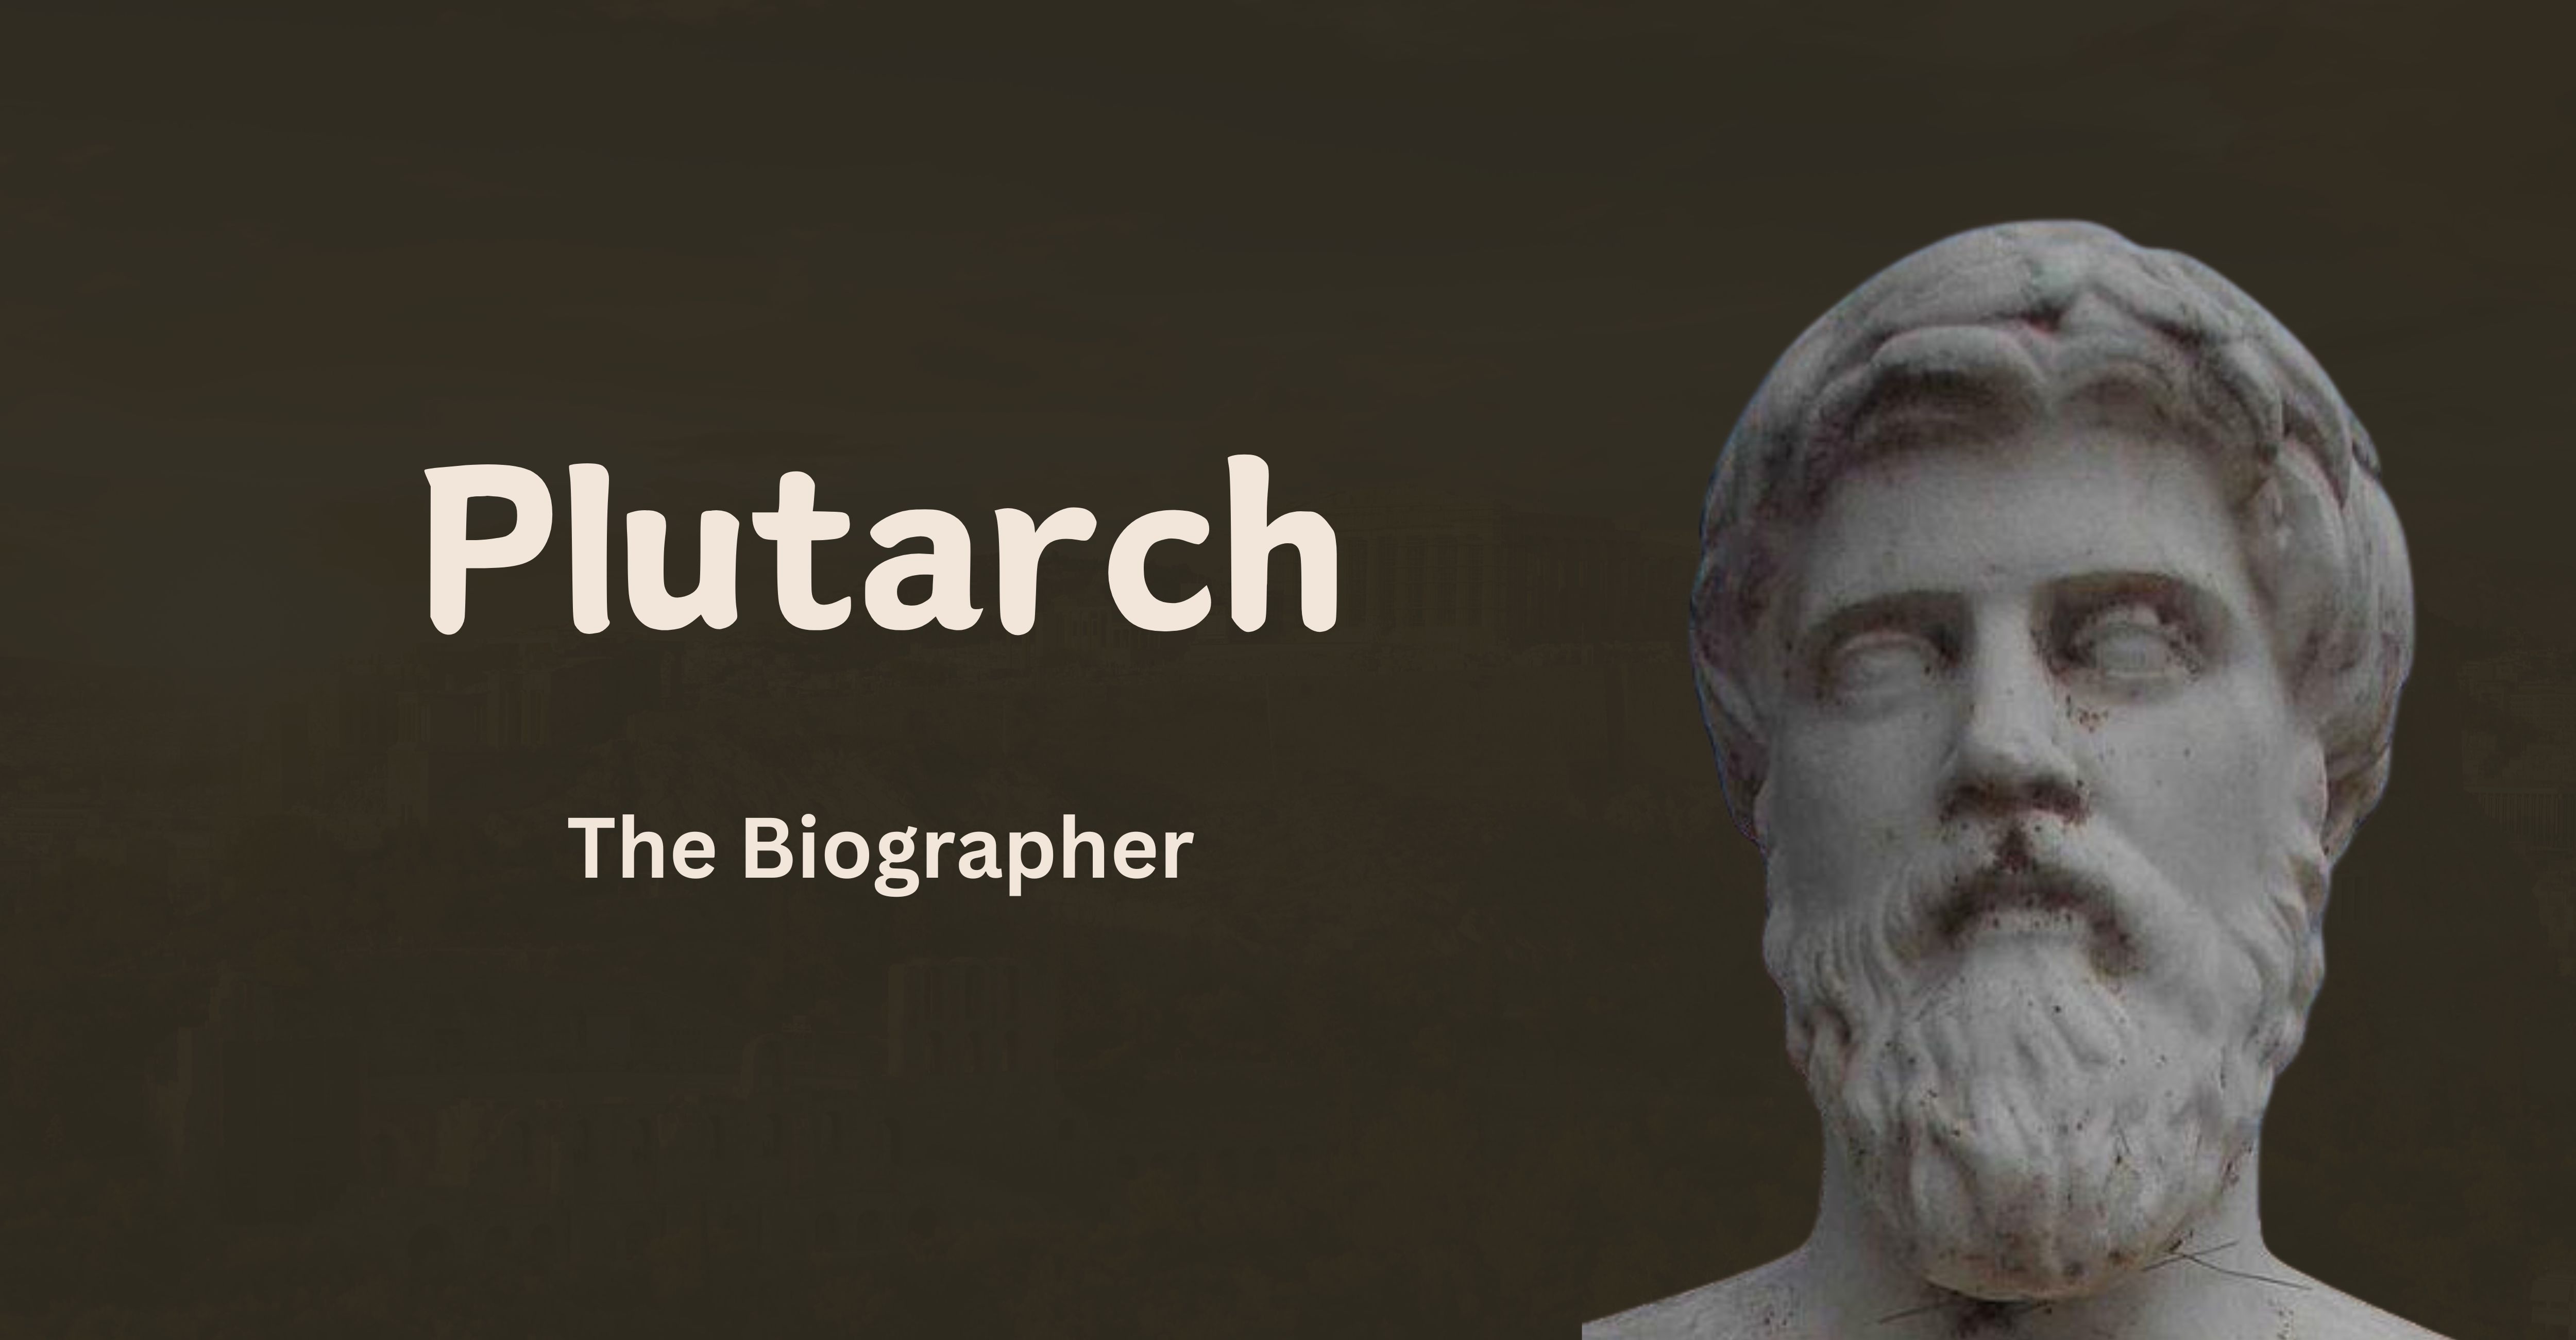 Echoes of Ancient Wisdom: 5 Meaty Quotes by Plutarch